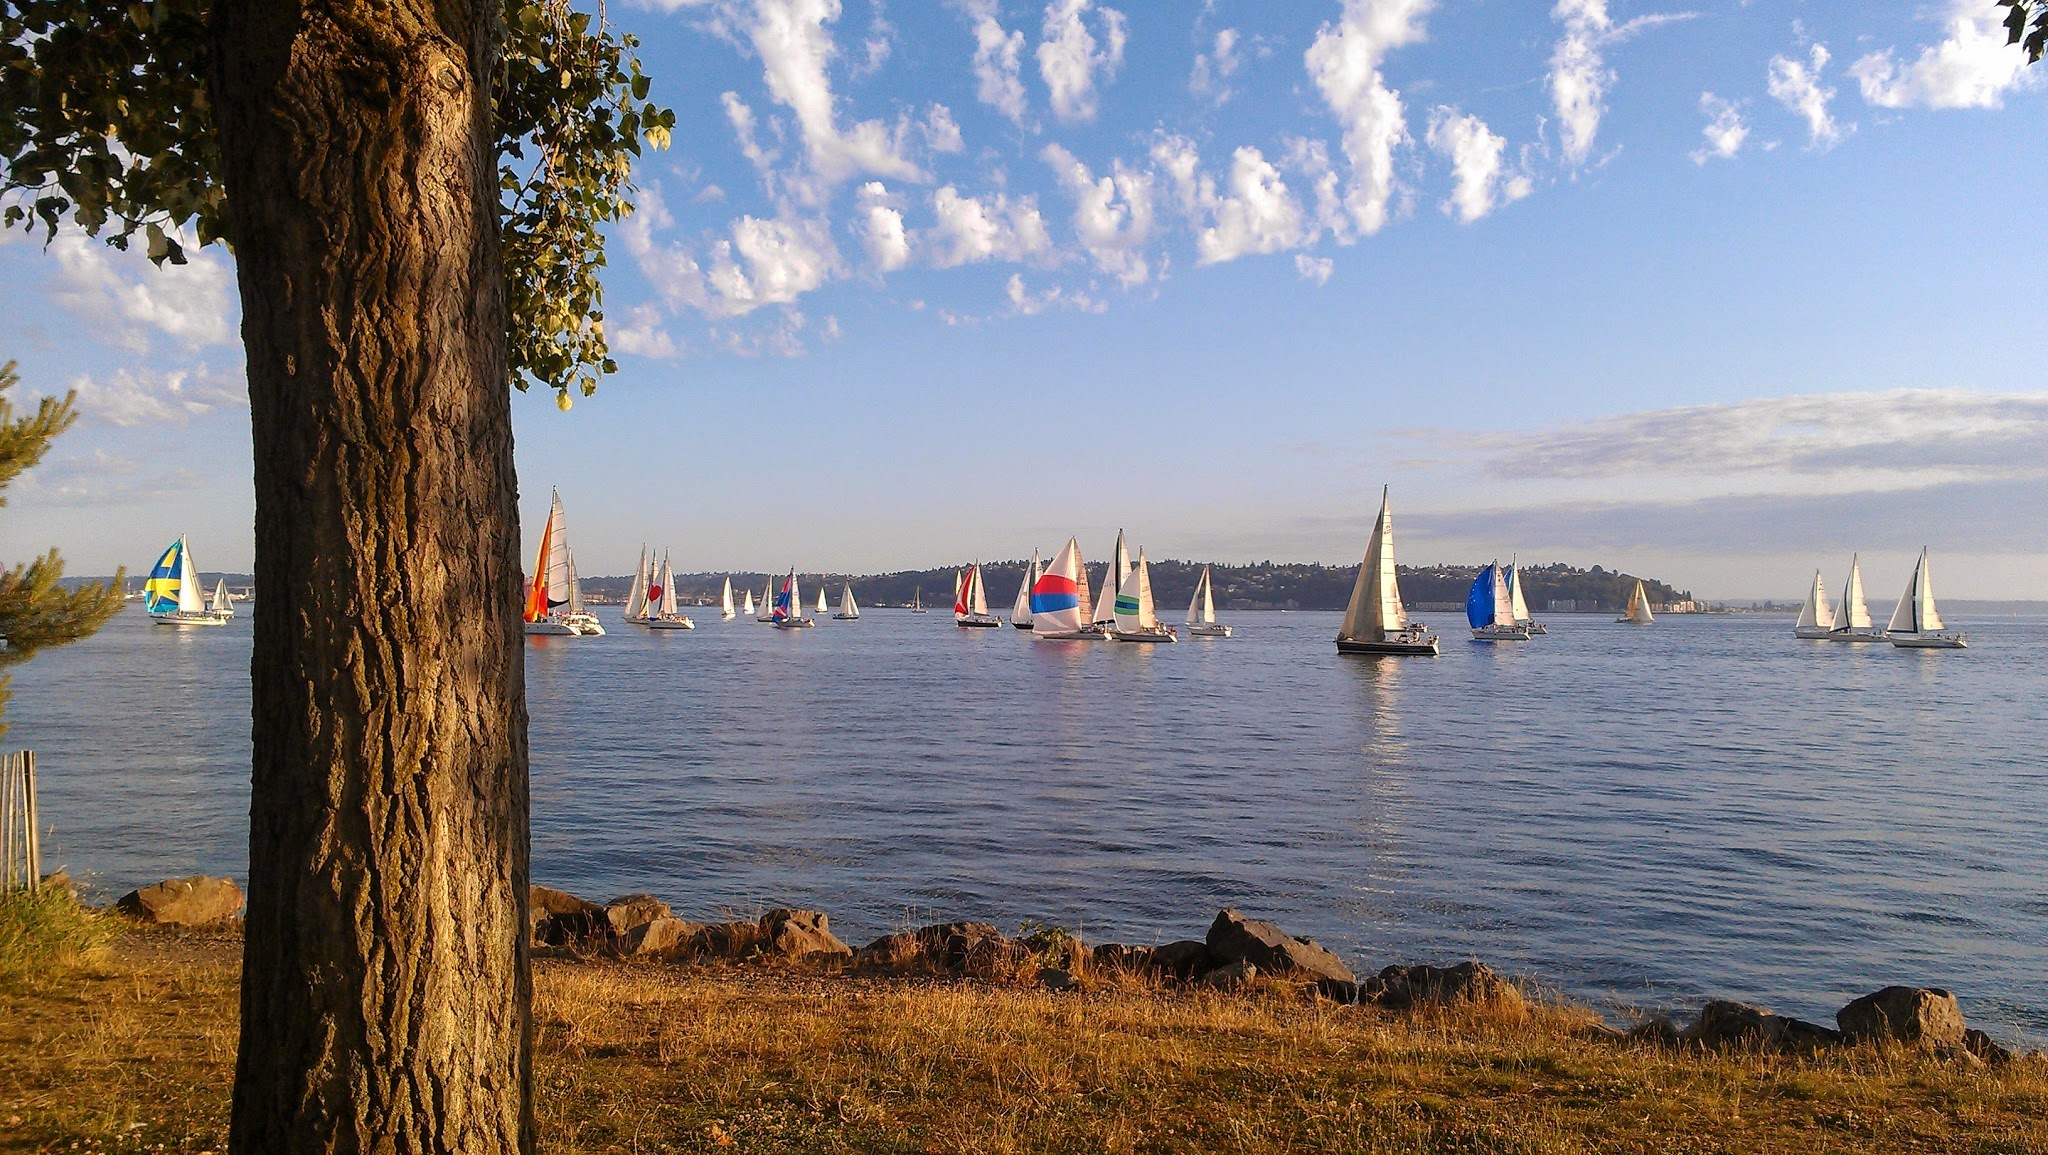 A tree in the grass in the foreground next to the shore of the water. There are lots of sailboats with many colored sails just off shore. There is a blue sky with small white clouds